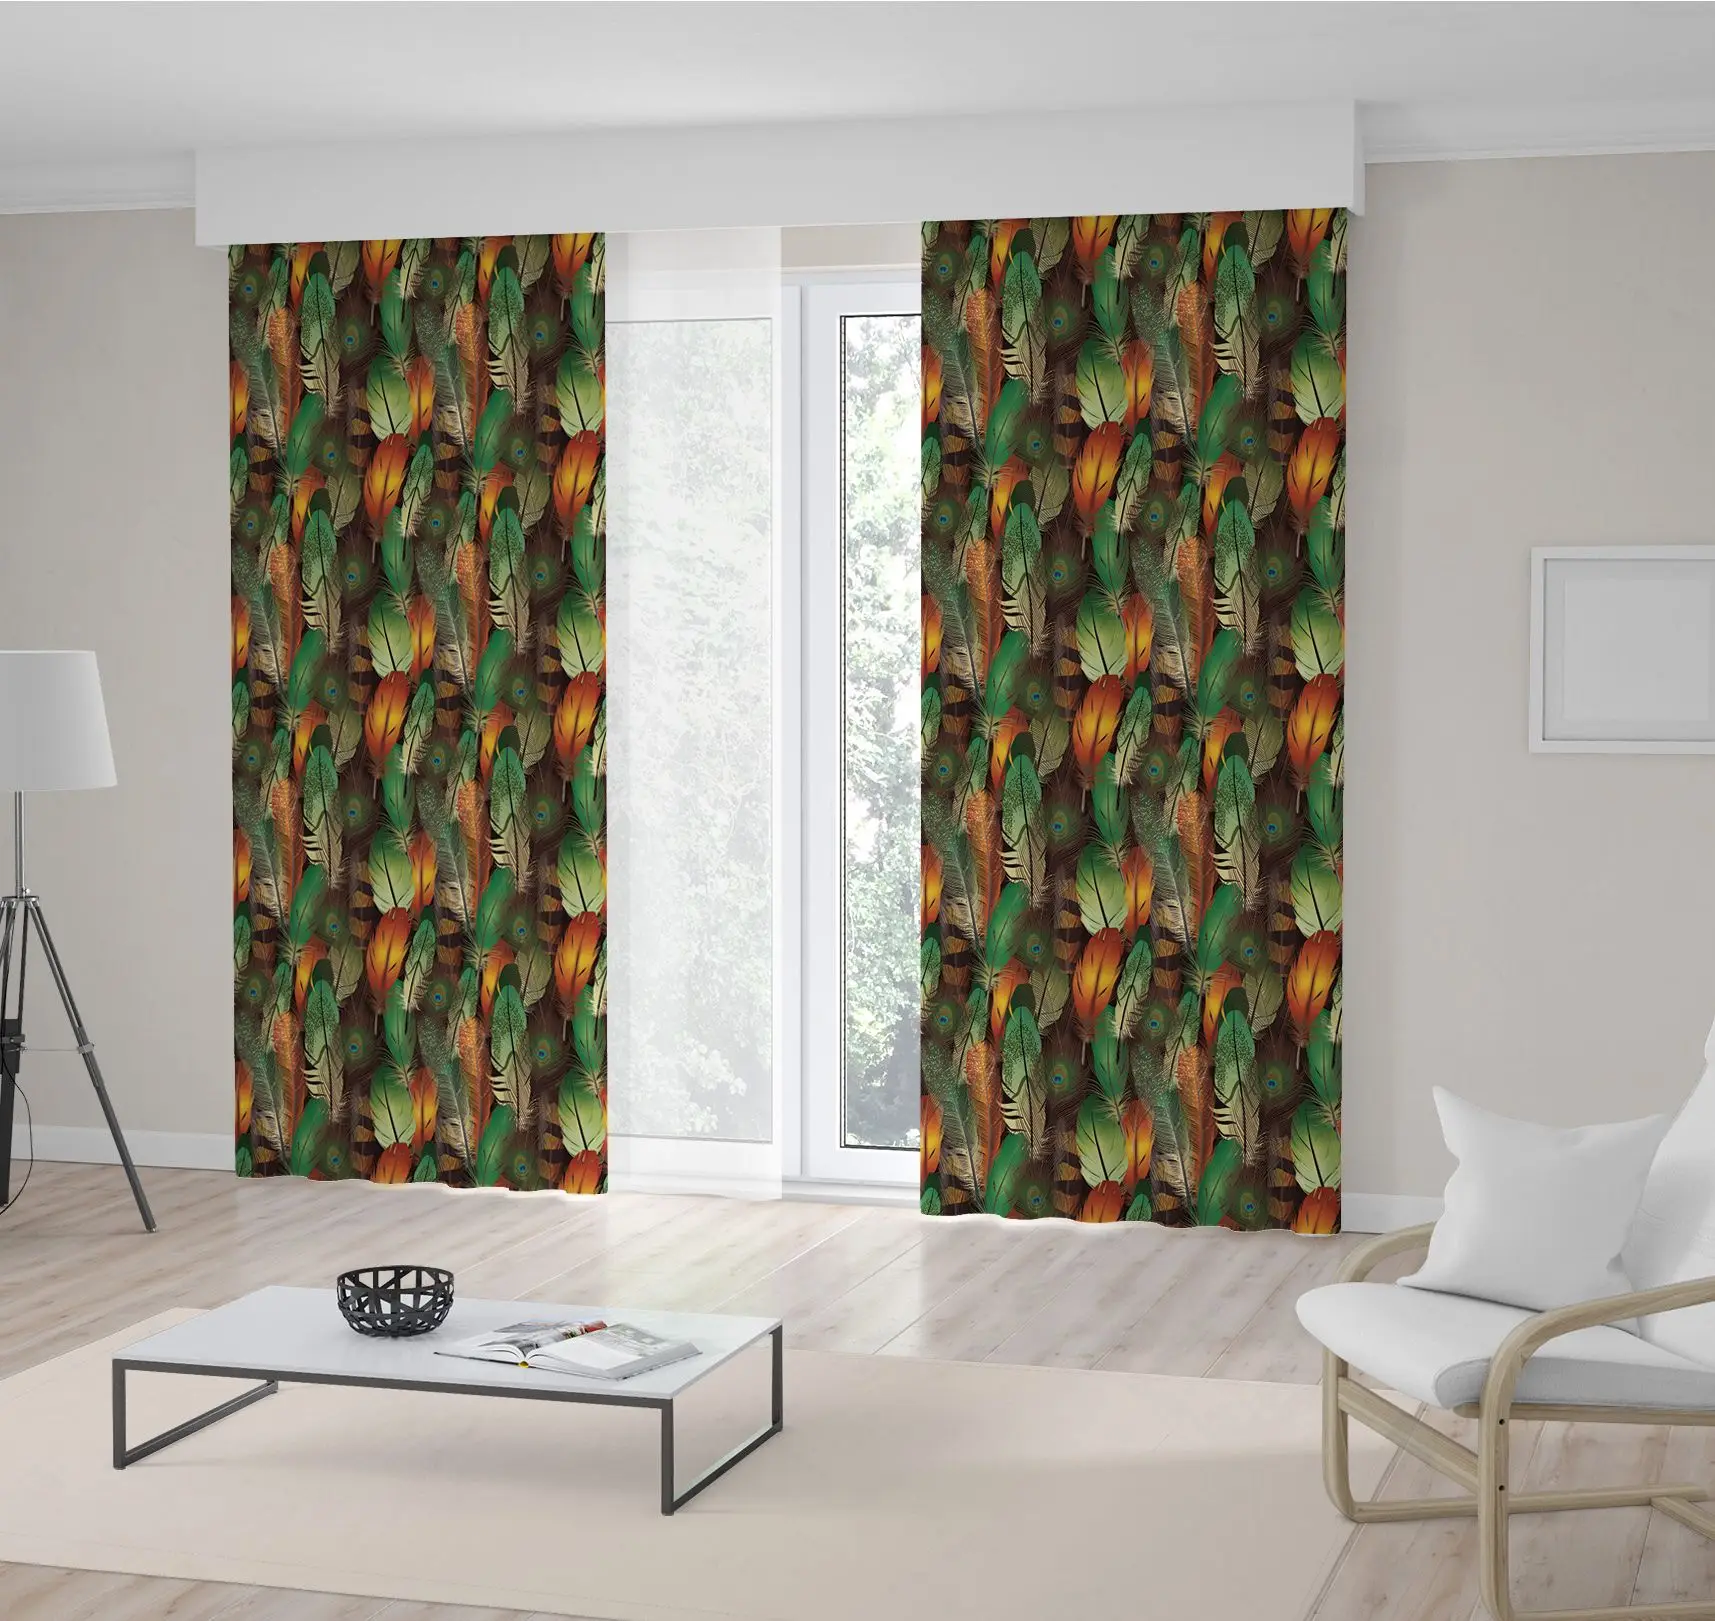 

Curtain Colorful Birds Peacock Feathers Pattern Realistic Illustration in Brown and Green Exotic Nature Theme Artwork